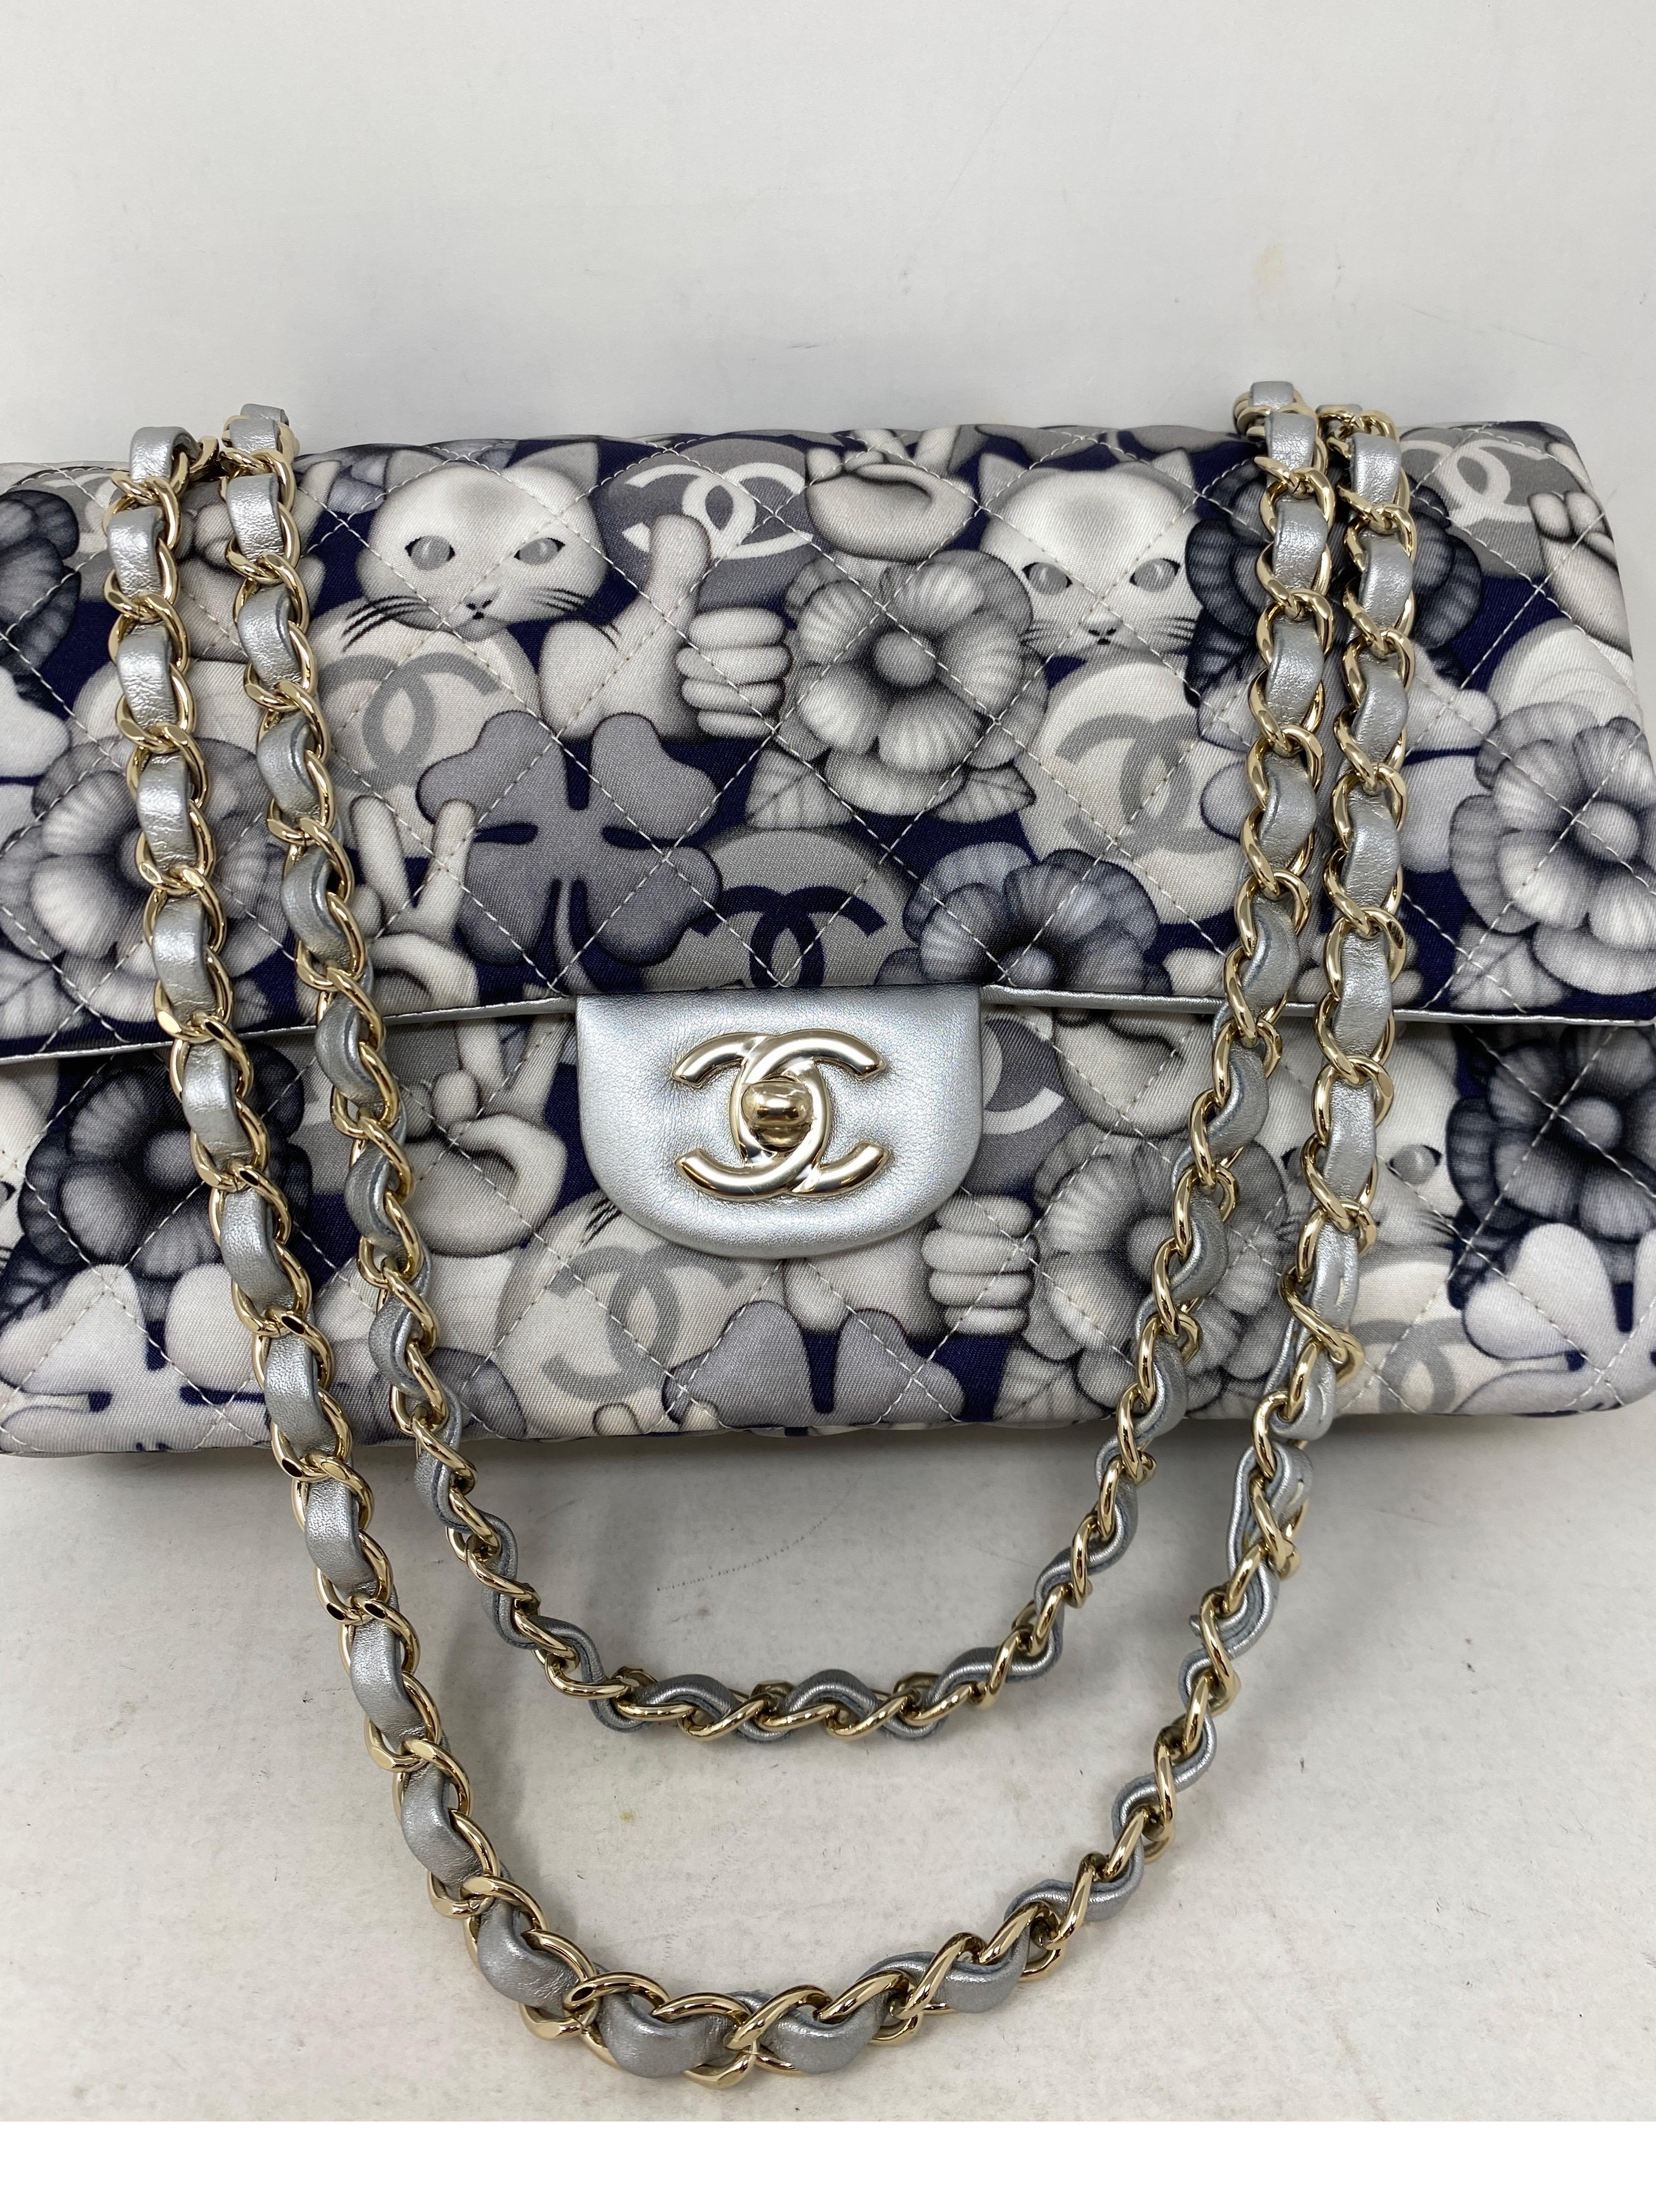 Chanel Limited Edition Cat Bag. Rare cat design fabric Chanel bag with leather trim and interior. Limited series and a collector's piece. Never used. Brand new condition. Includes full set with authenticity card and all original tags. Includes